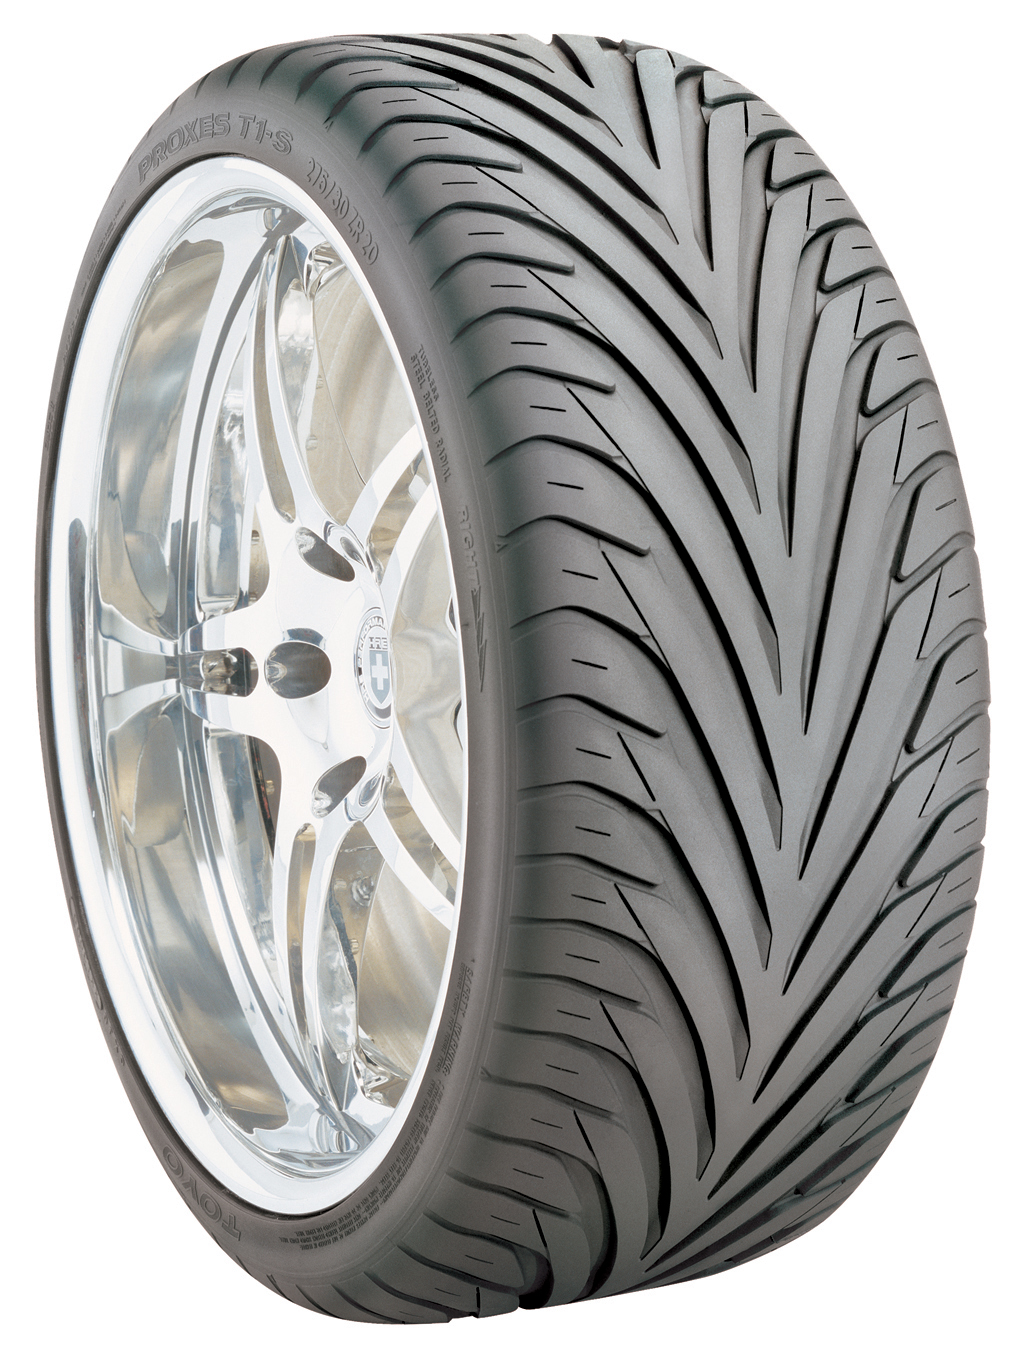 Proxes T1-S 225/50 R17 98Y